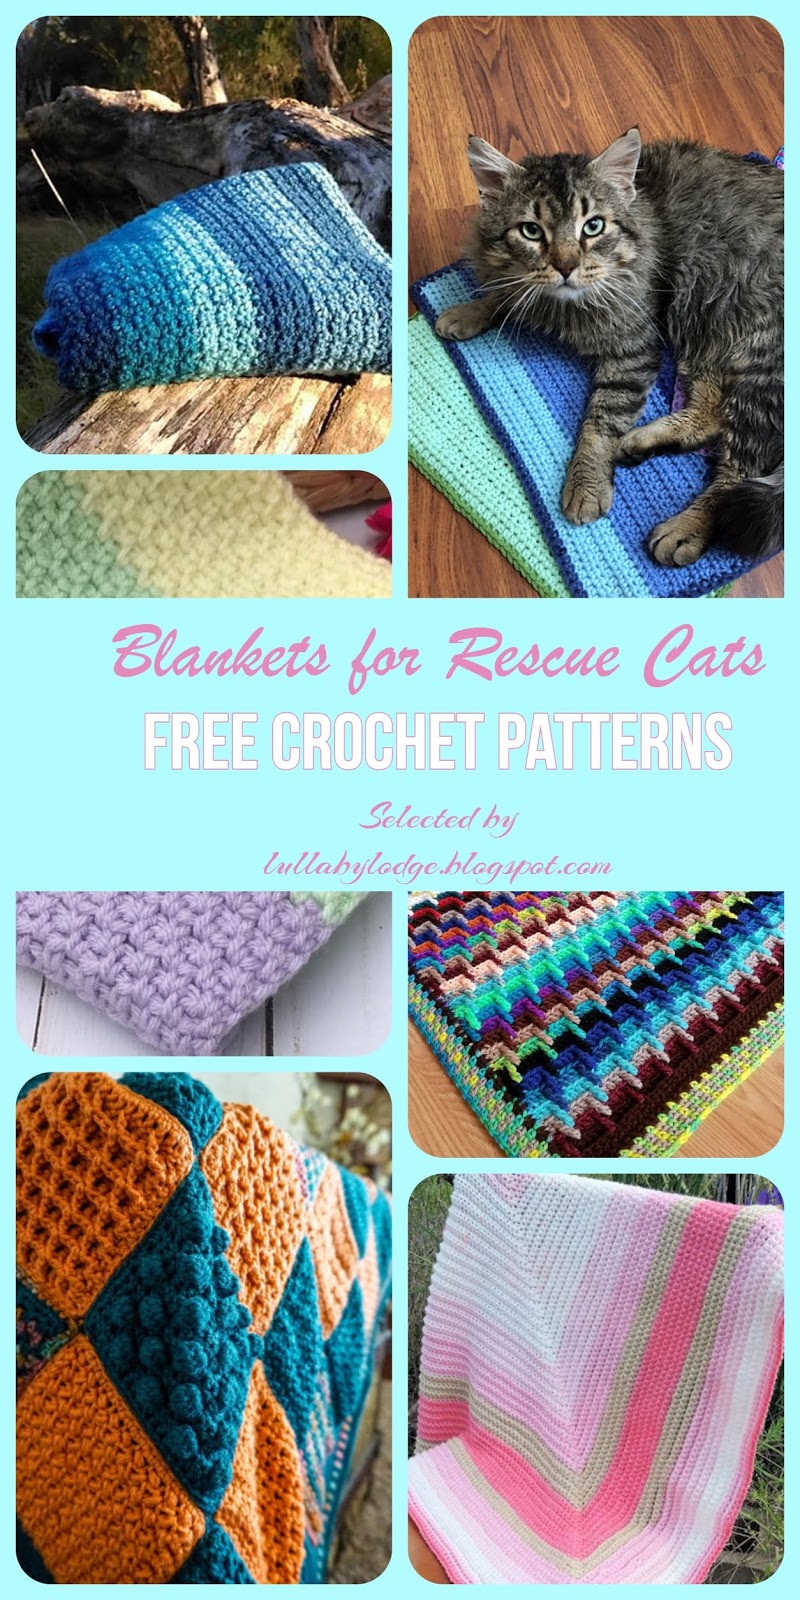 Lullaby Lodge: Make a blanket for a rescue cat - Free crochet patterns  selected by Lullaby Lodge